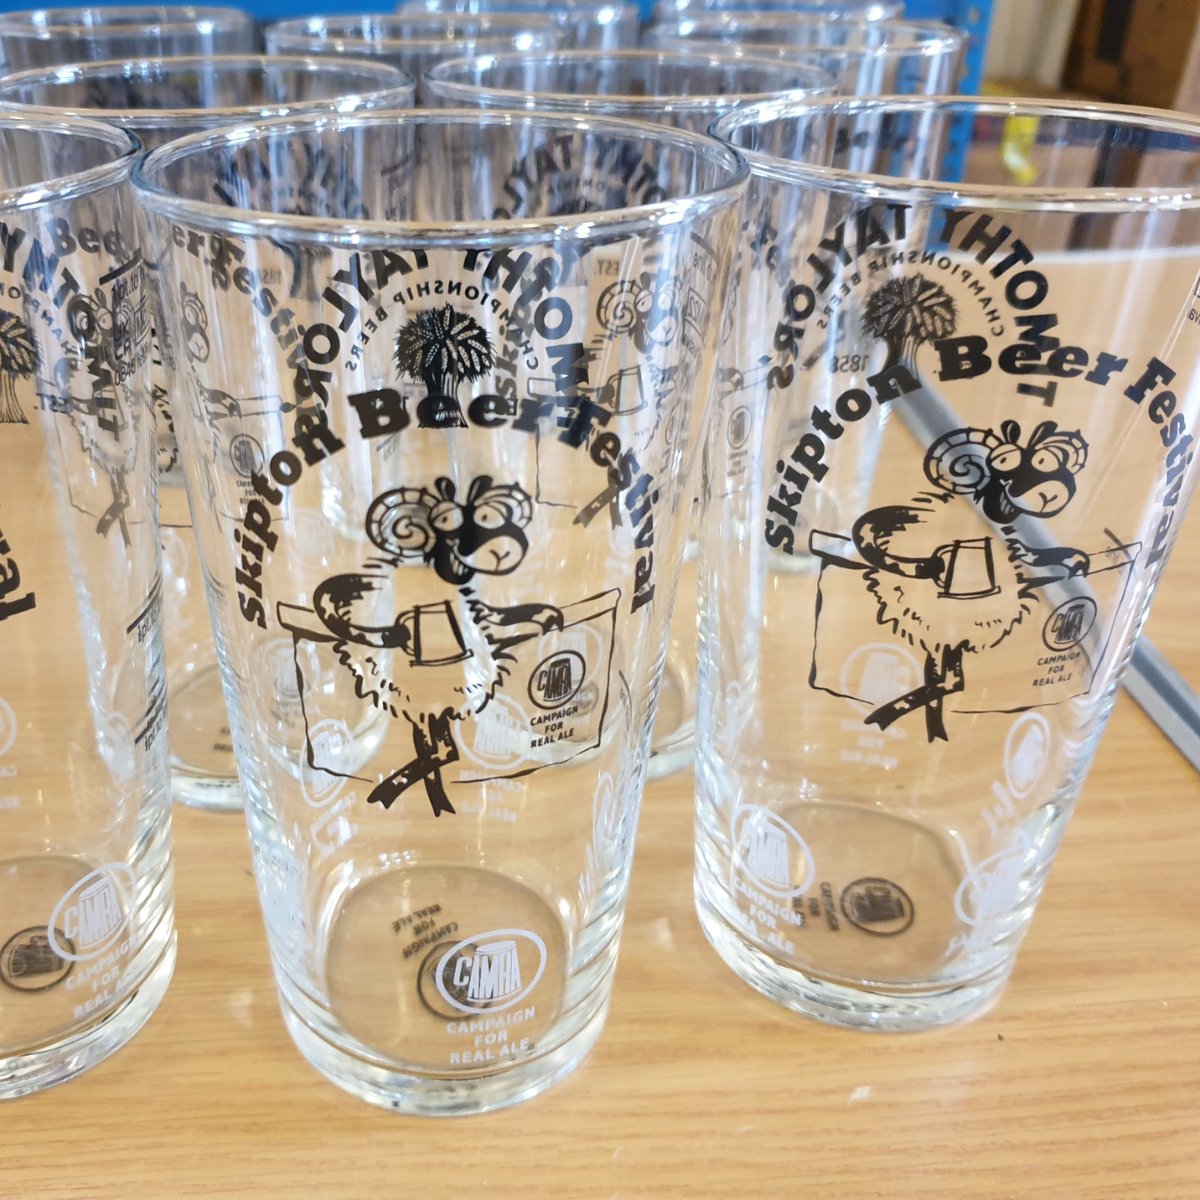 #Skipton #BeerFestival returns to Skipton Town Hall to kick off the spring bank holiday weekend!🍻 @keighleycamra will be here with 70 real ales to choose from! Opening Times Thu 23: 11am – 10pm Fri 24: 11am – 10pm Sat 25: 11am – 8pm